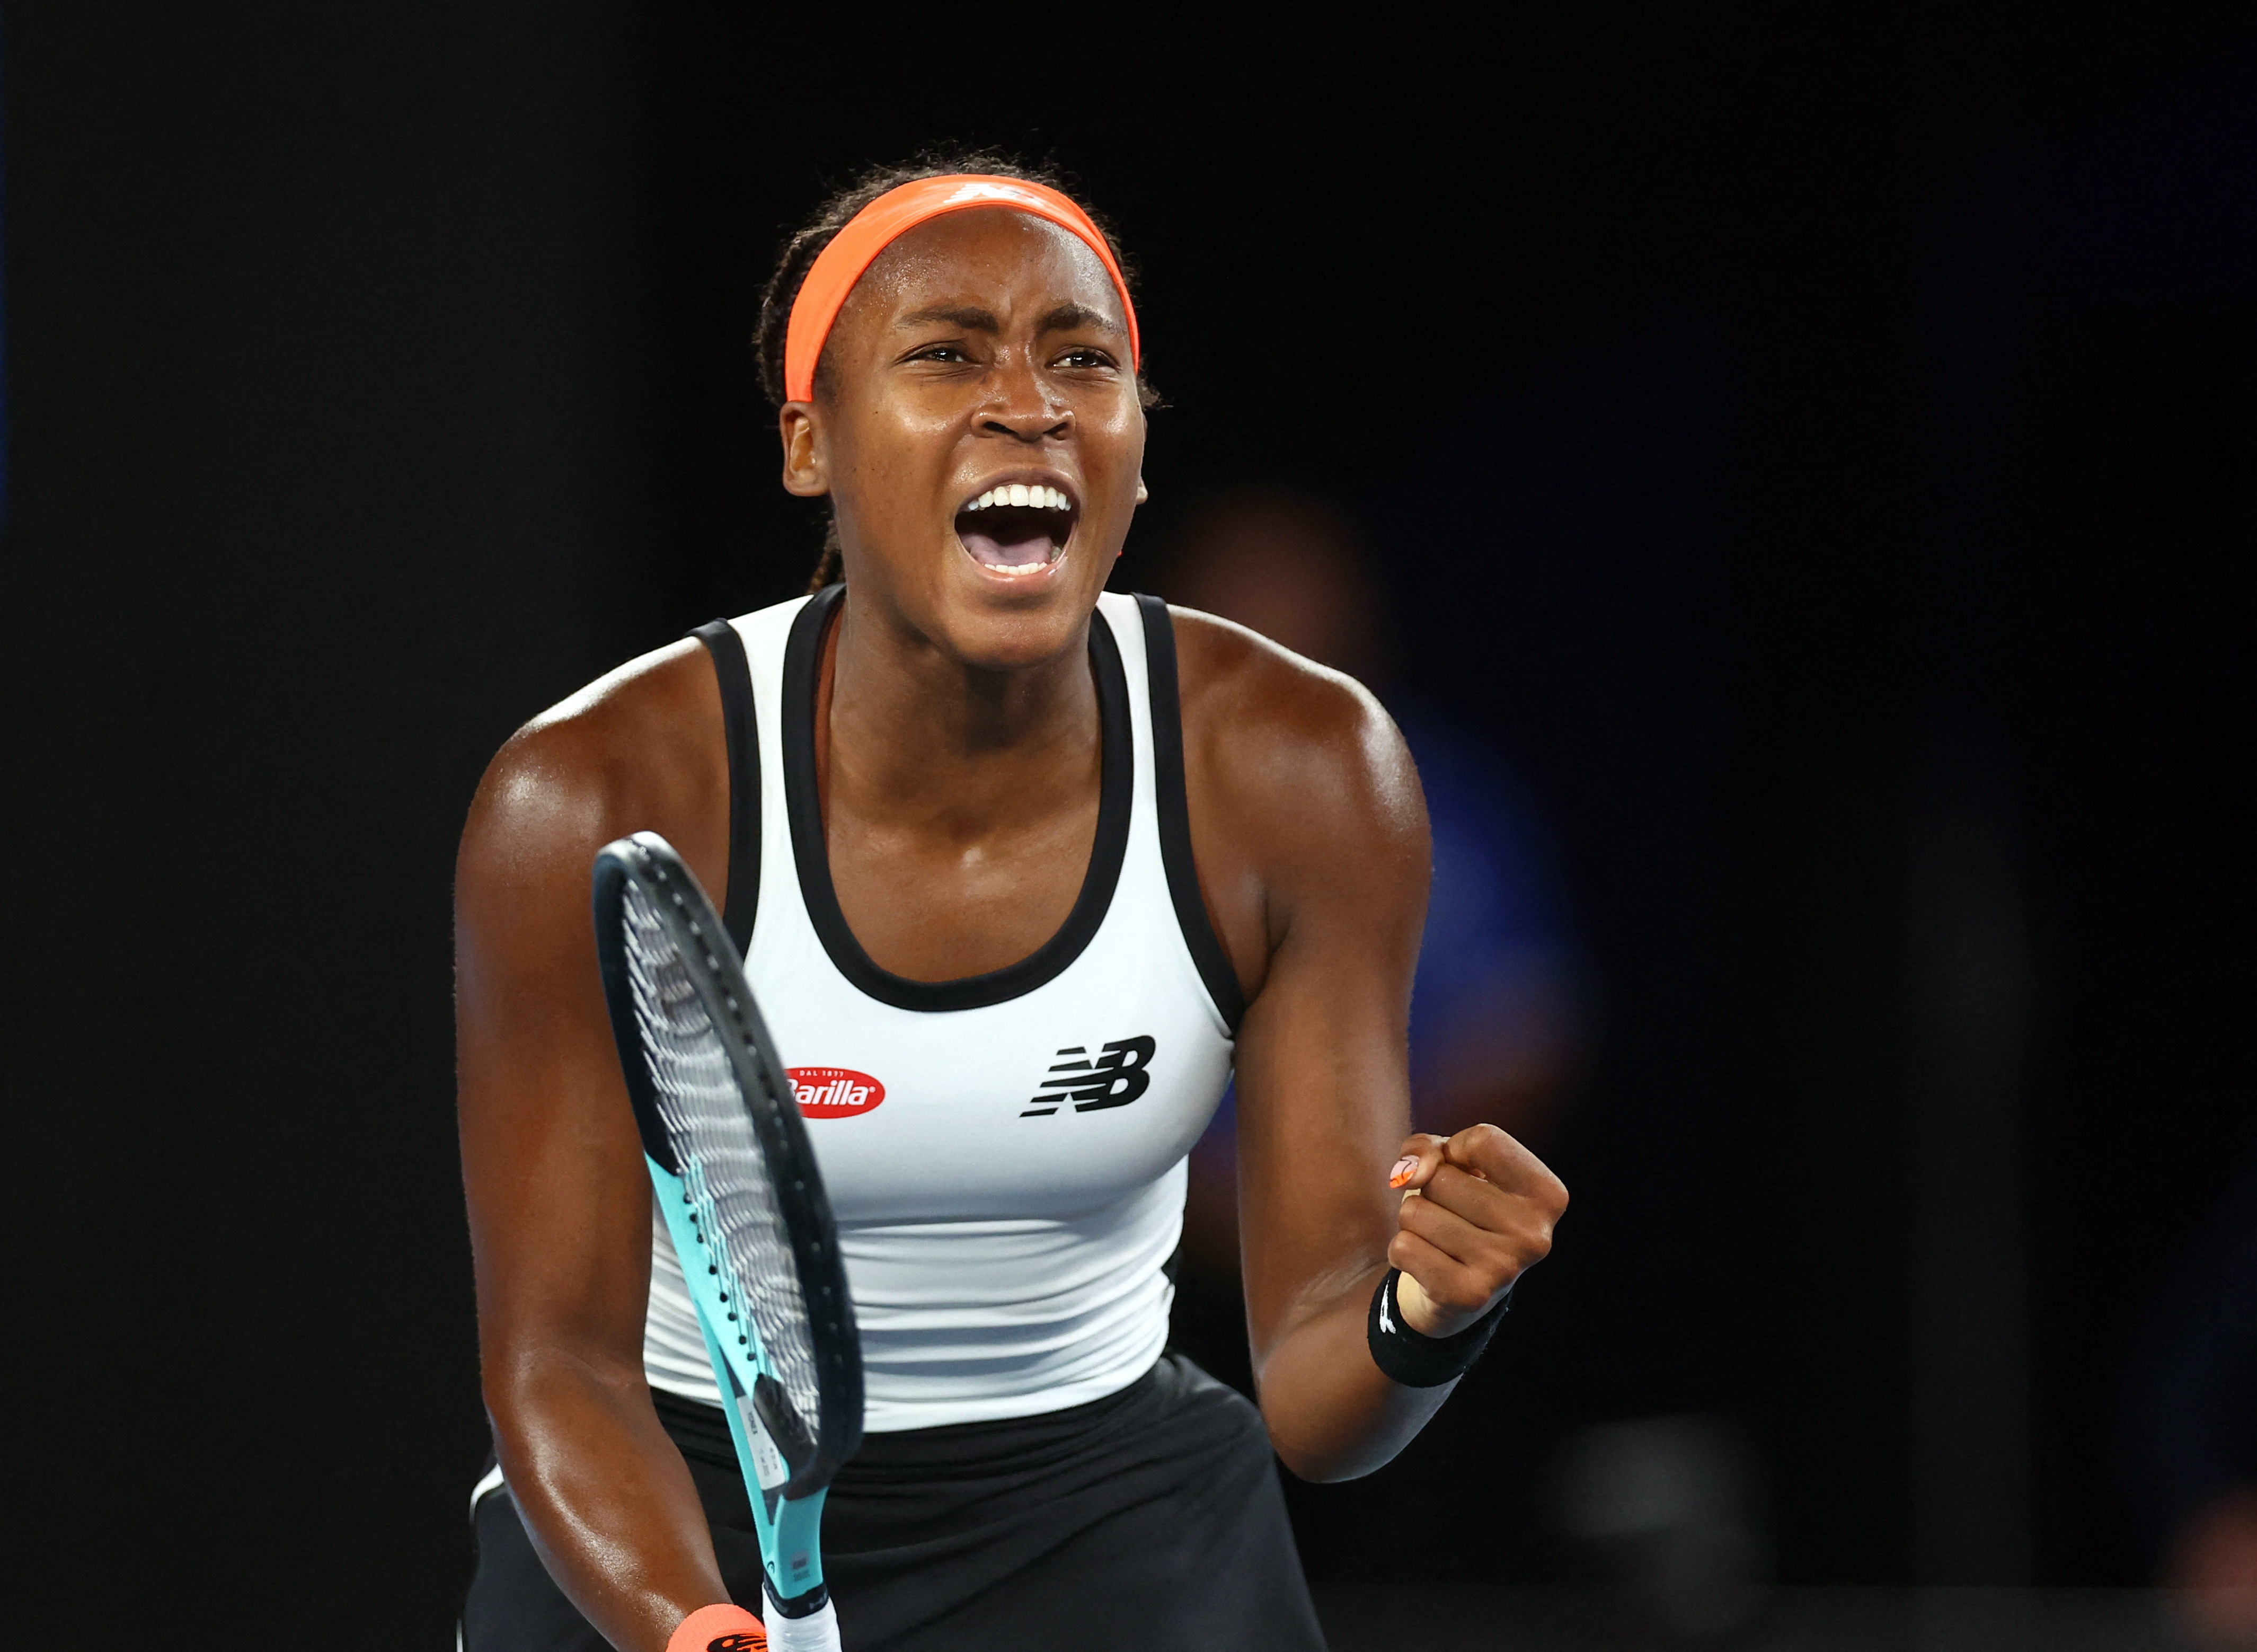 Australia Open Results: Coco Gauff outshines Emma Raducanu, clinches straight set victory to enter third round at Australian Open